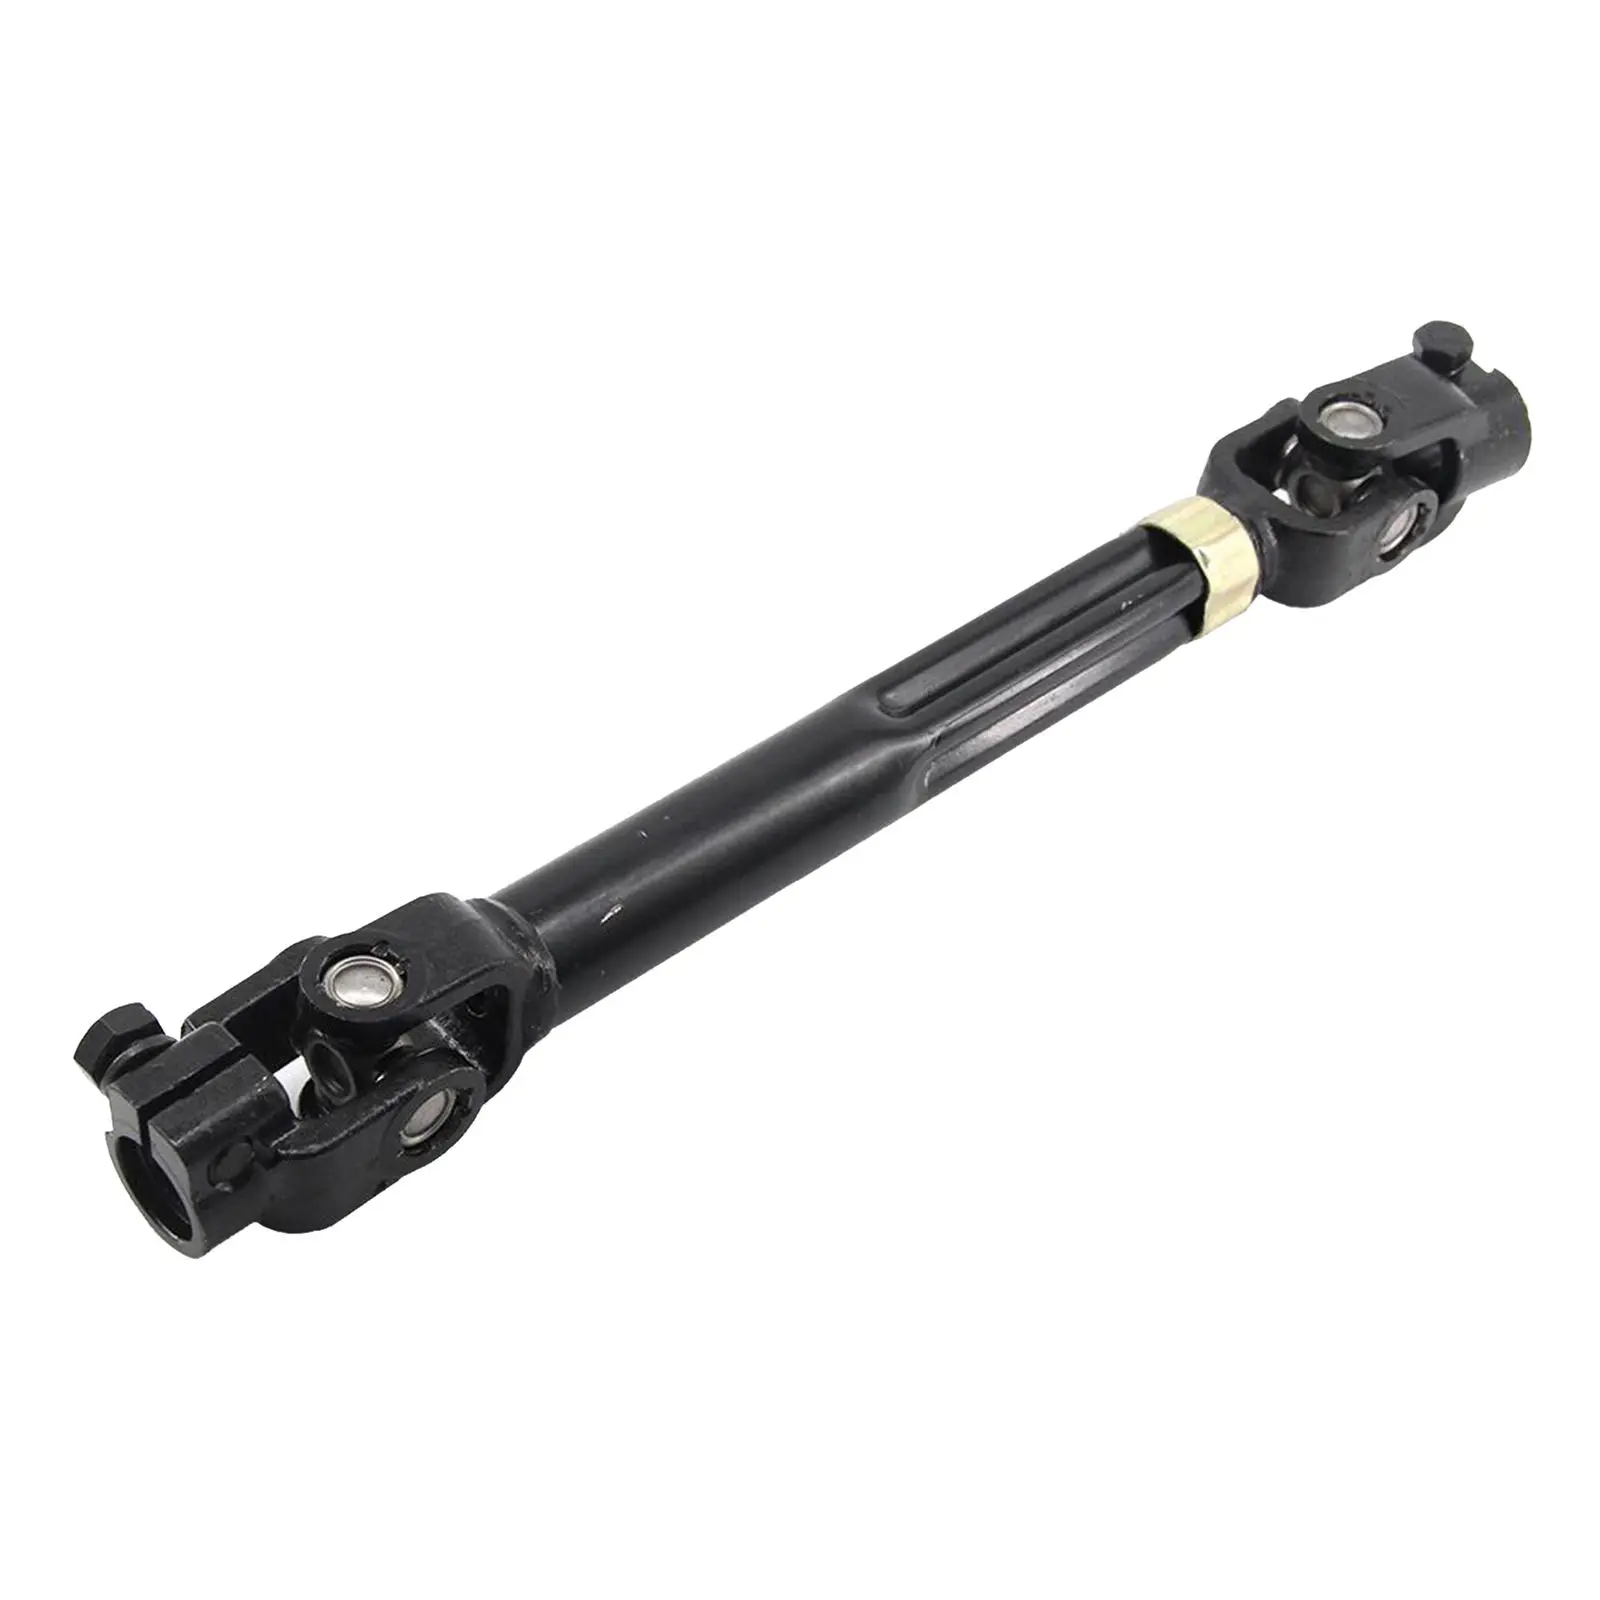 Steering Column Lower Intermediate Steering Shaft with U-Joint Coupler Replacement for 04-08 Ford F-150